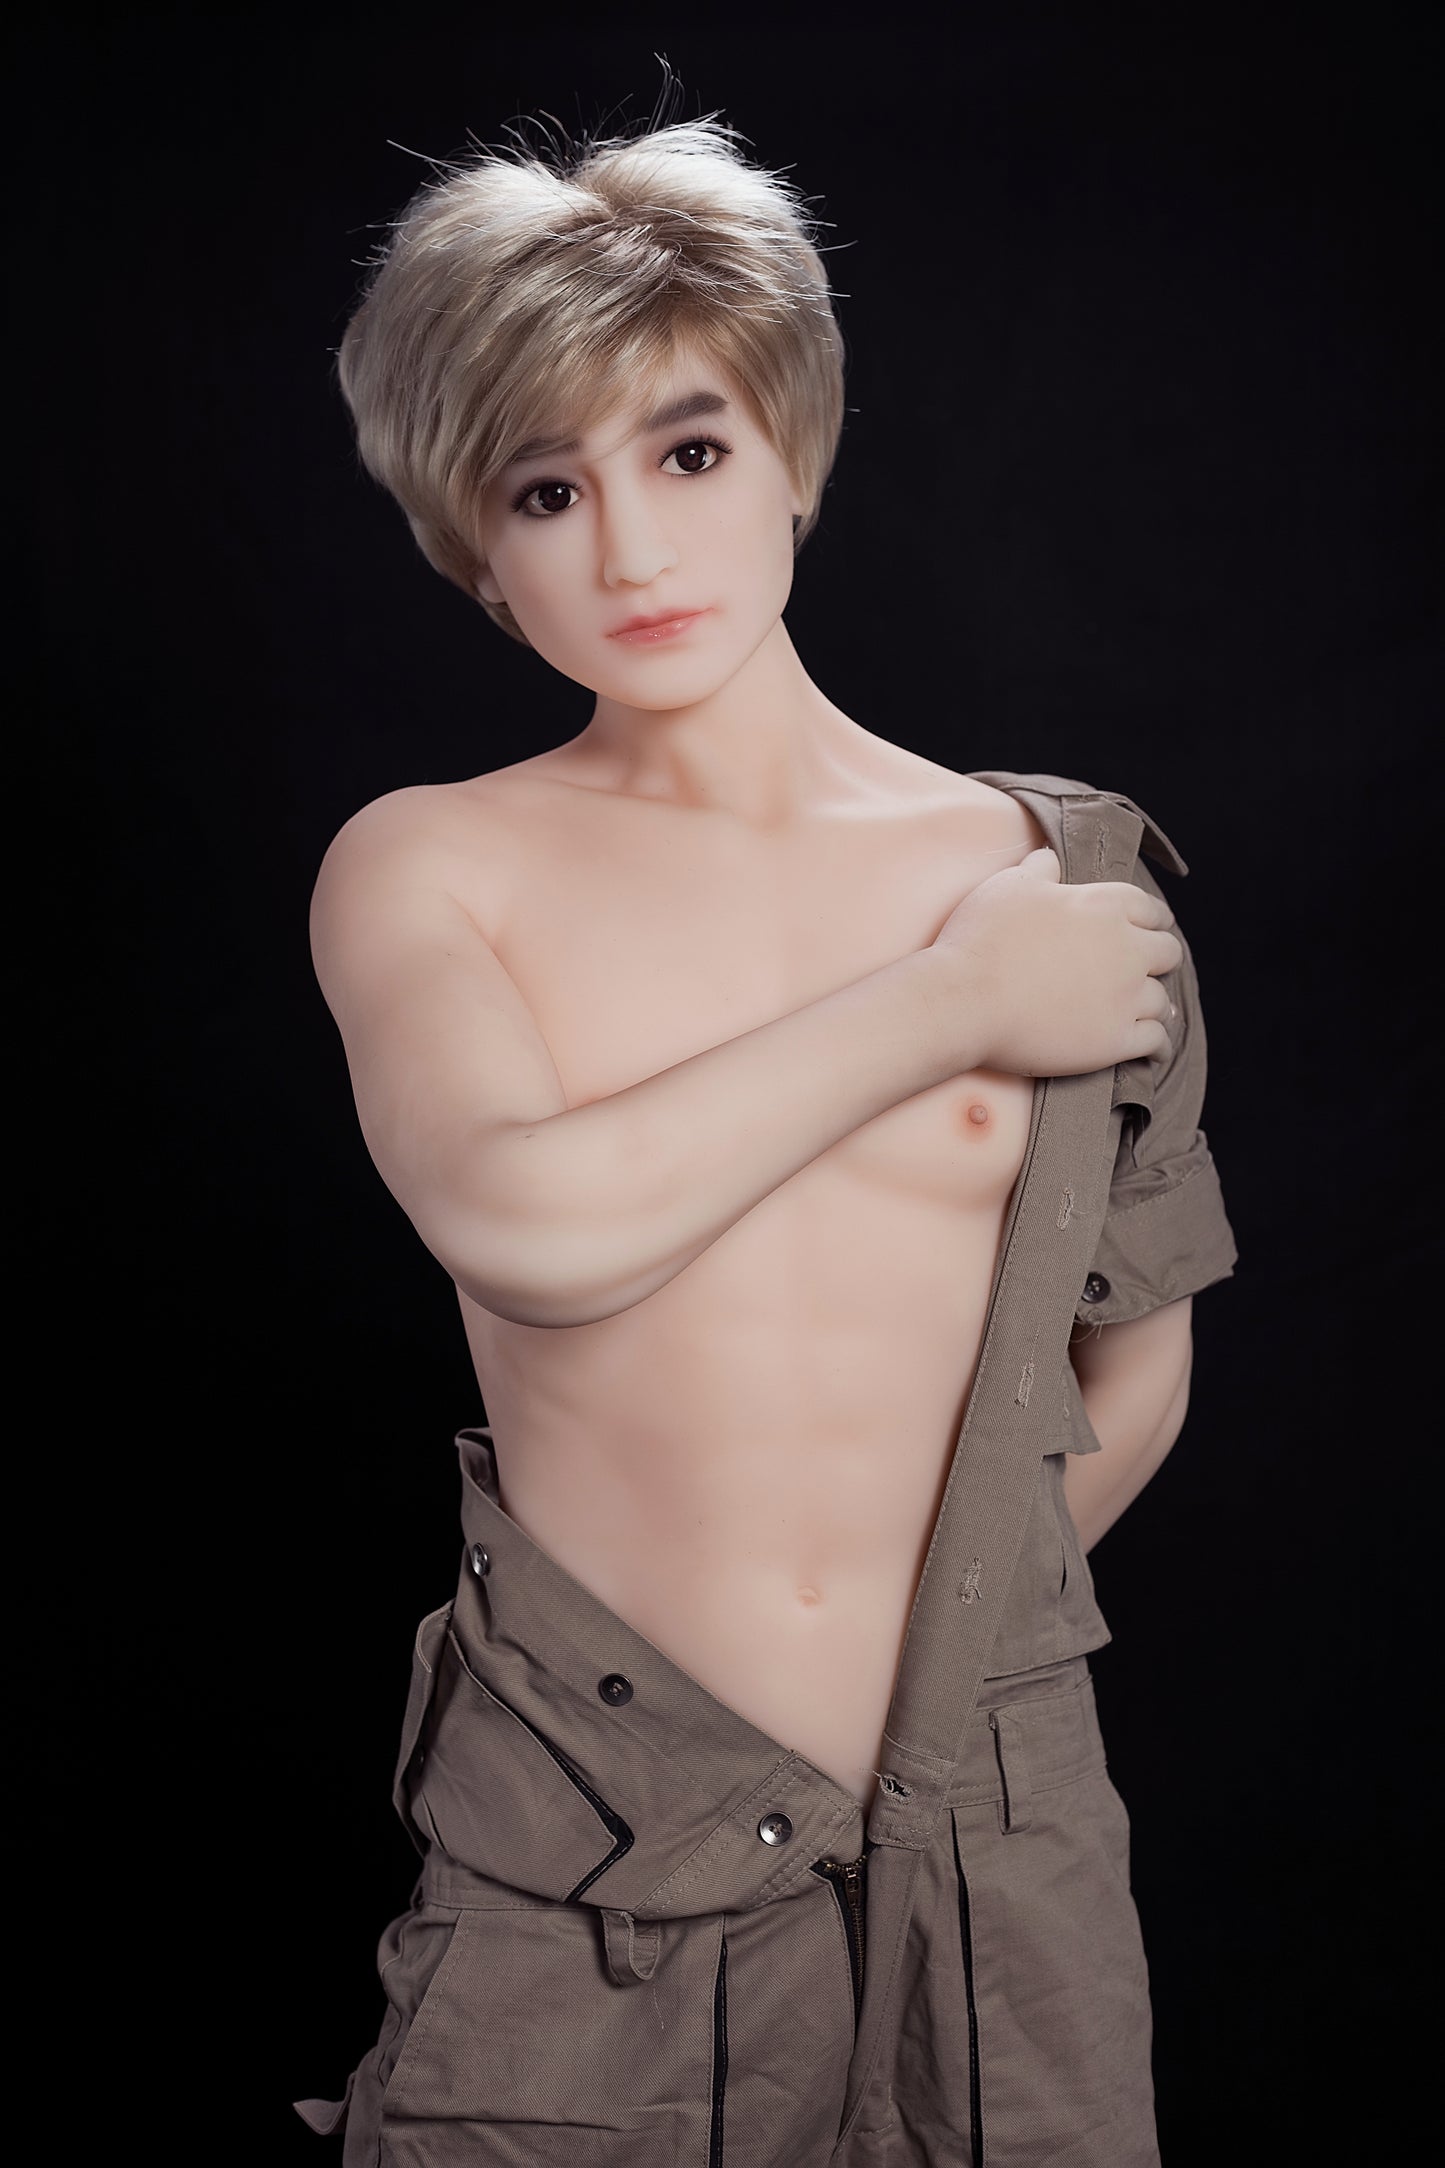 166cm Adult love doll Realistic male sex doll gay doll silicone guy doll for sex